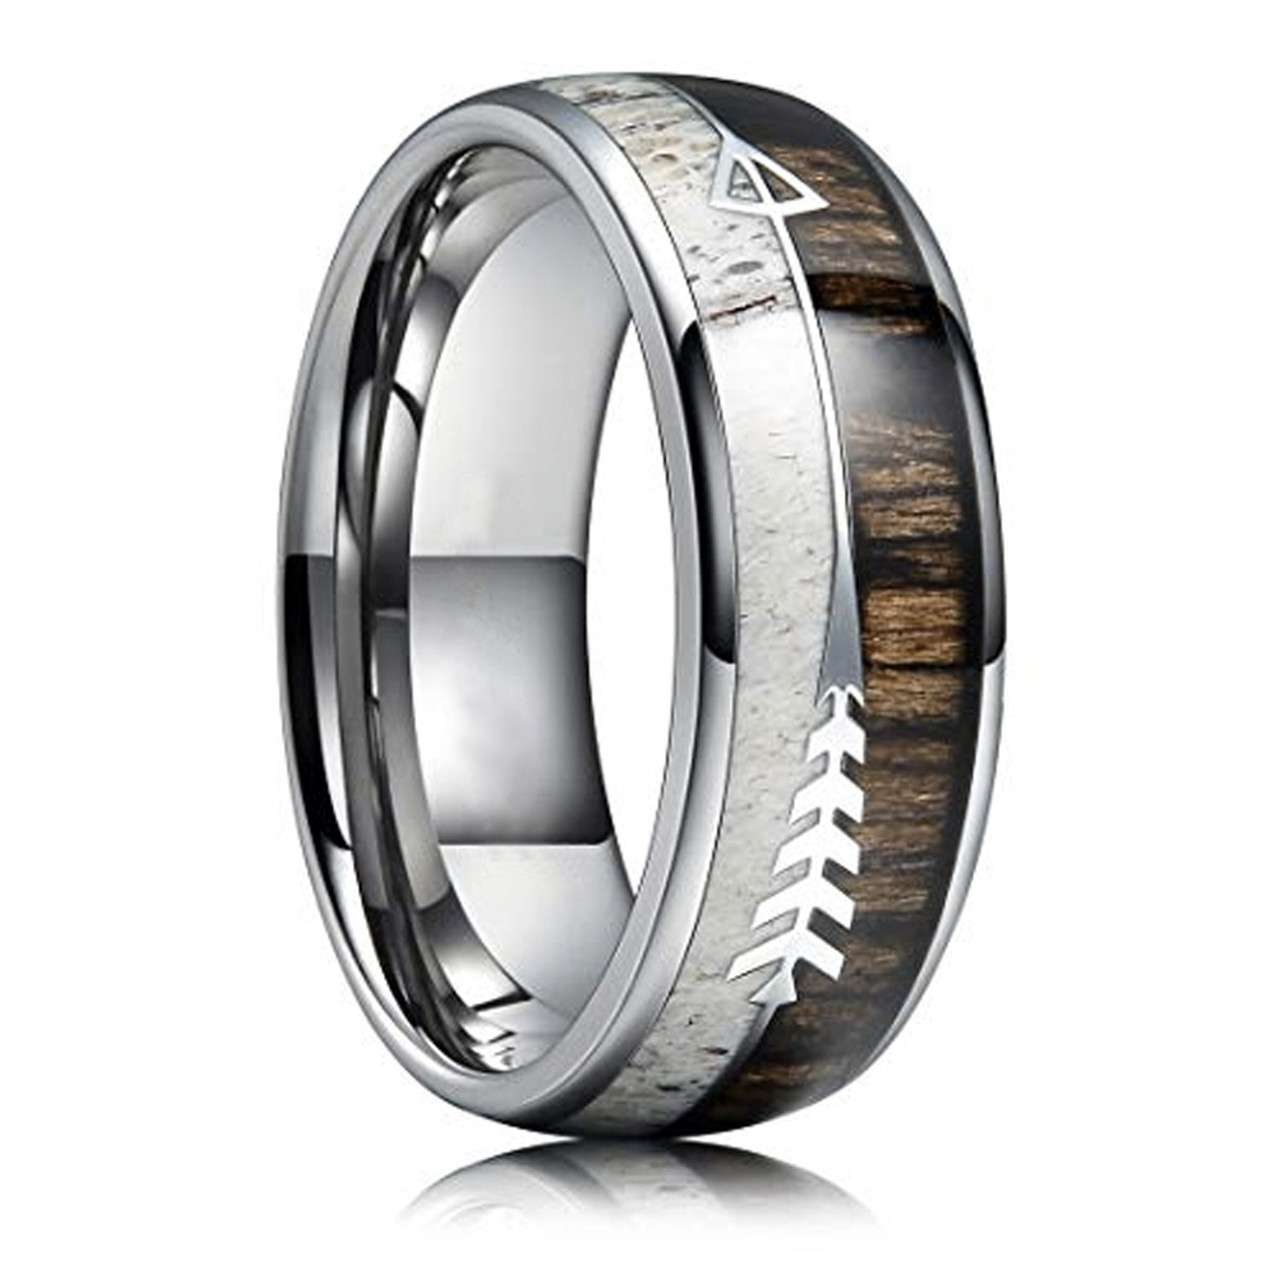 (8mm)  Unisex or Men's Tungsten Carbide Wedding ring bands. Silver Cupid's Arrow over Wood Inlay. Tungsten Carbide Ring with High Polish Antler and Dark Wood Inlay. Domed Top Ring.